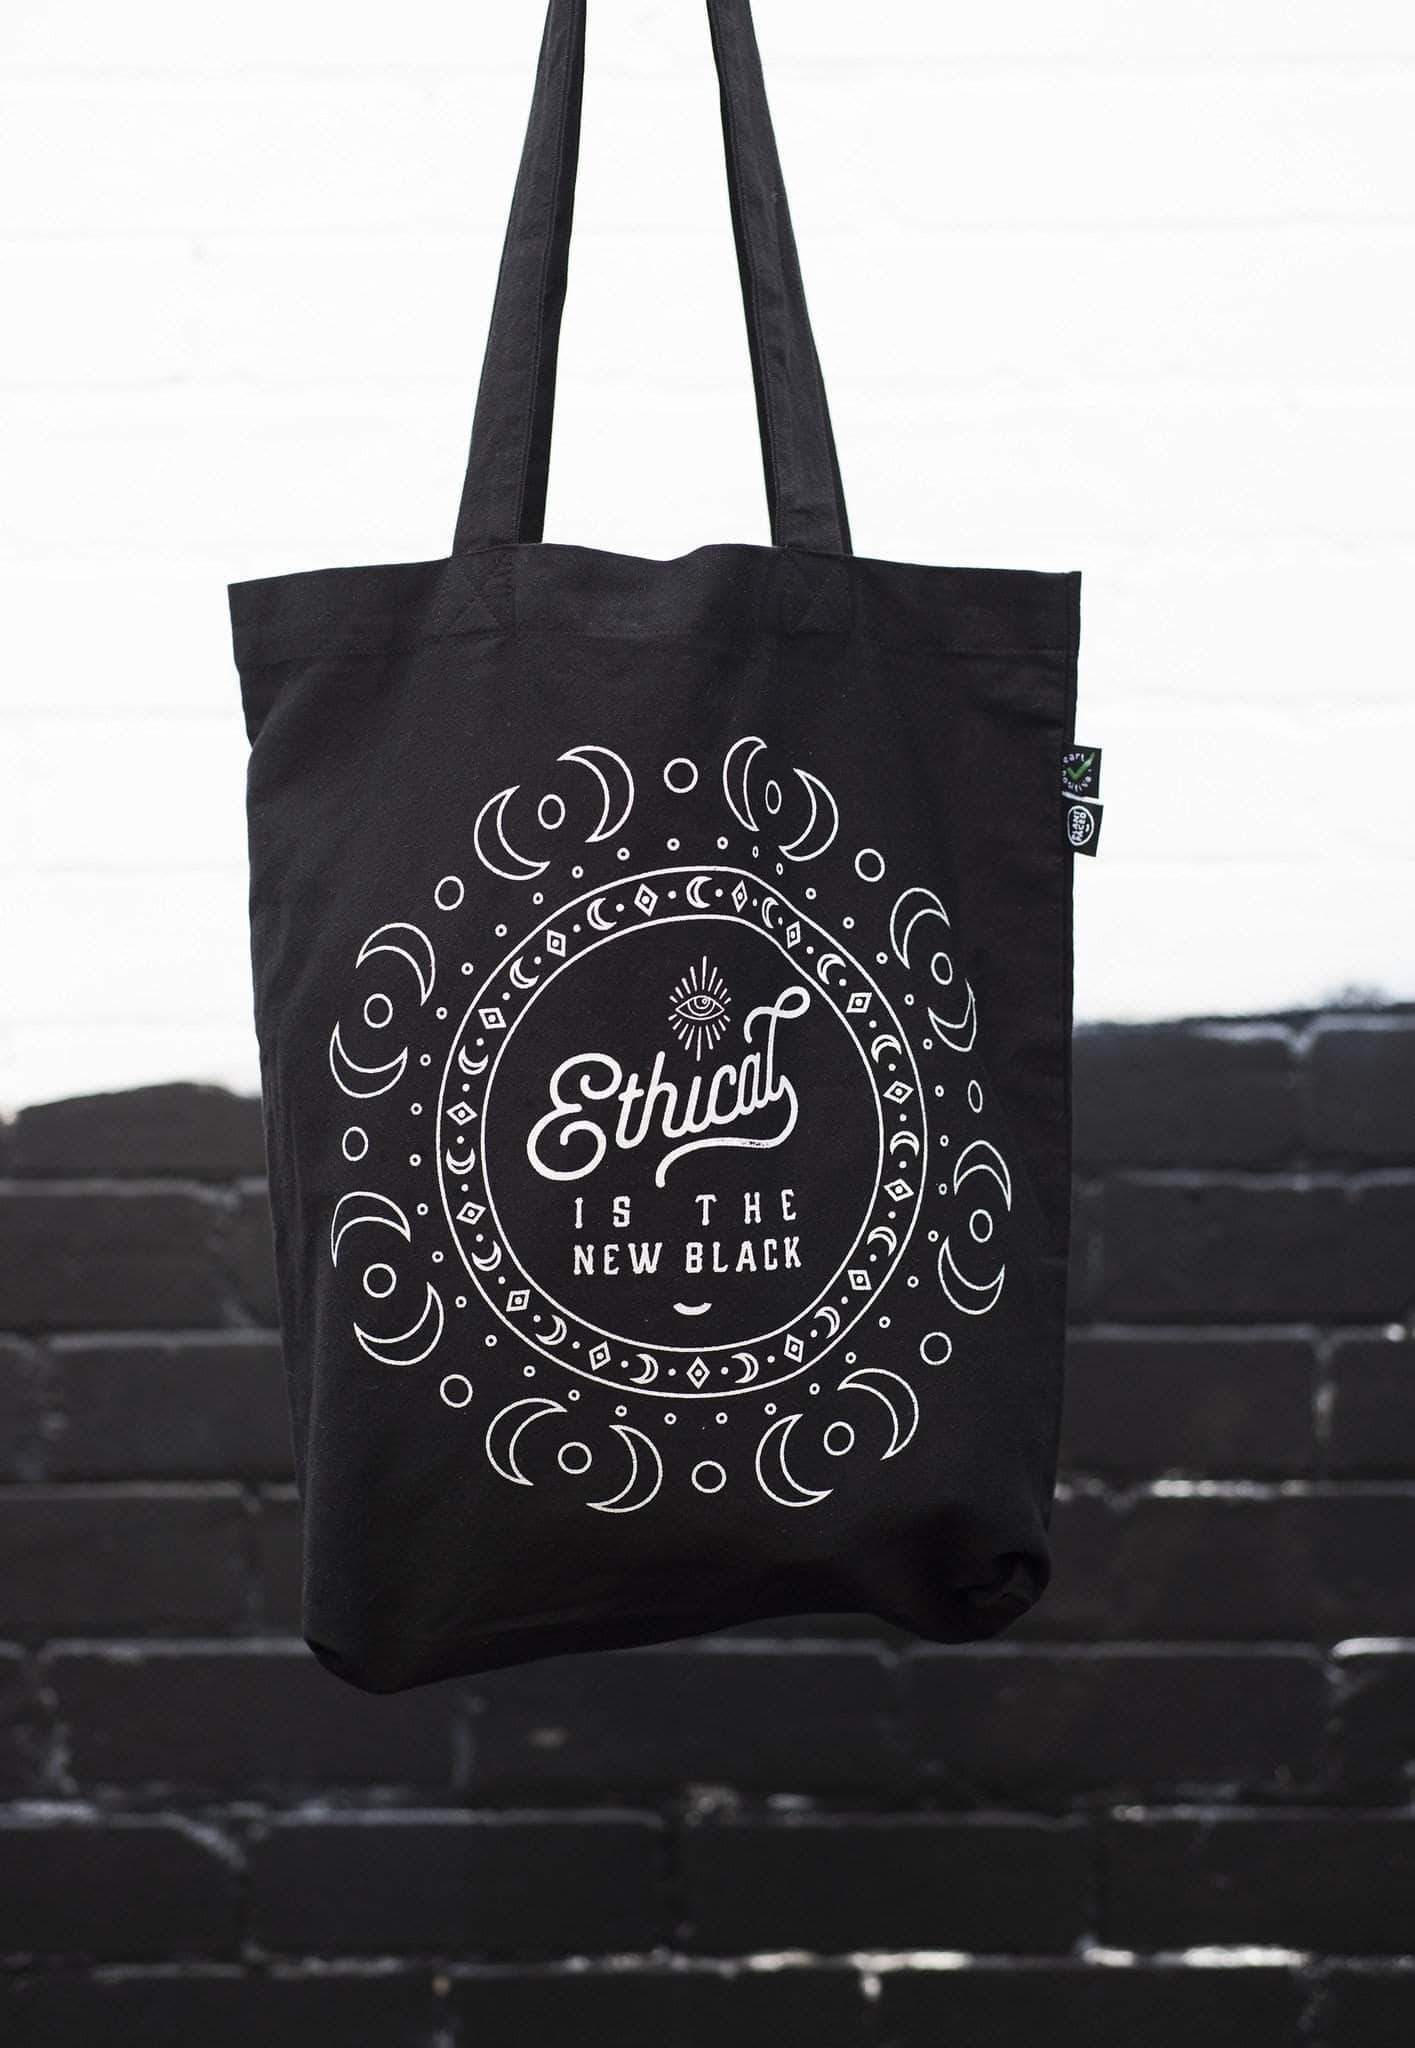 Black Cotton Tote Bag, Ethically Sourced